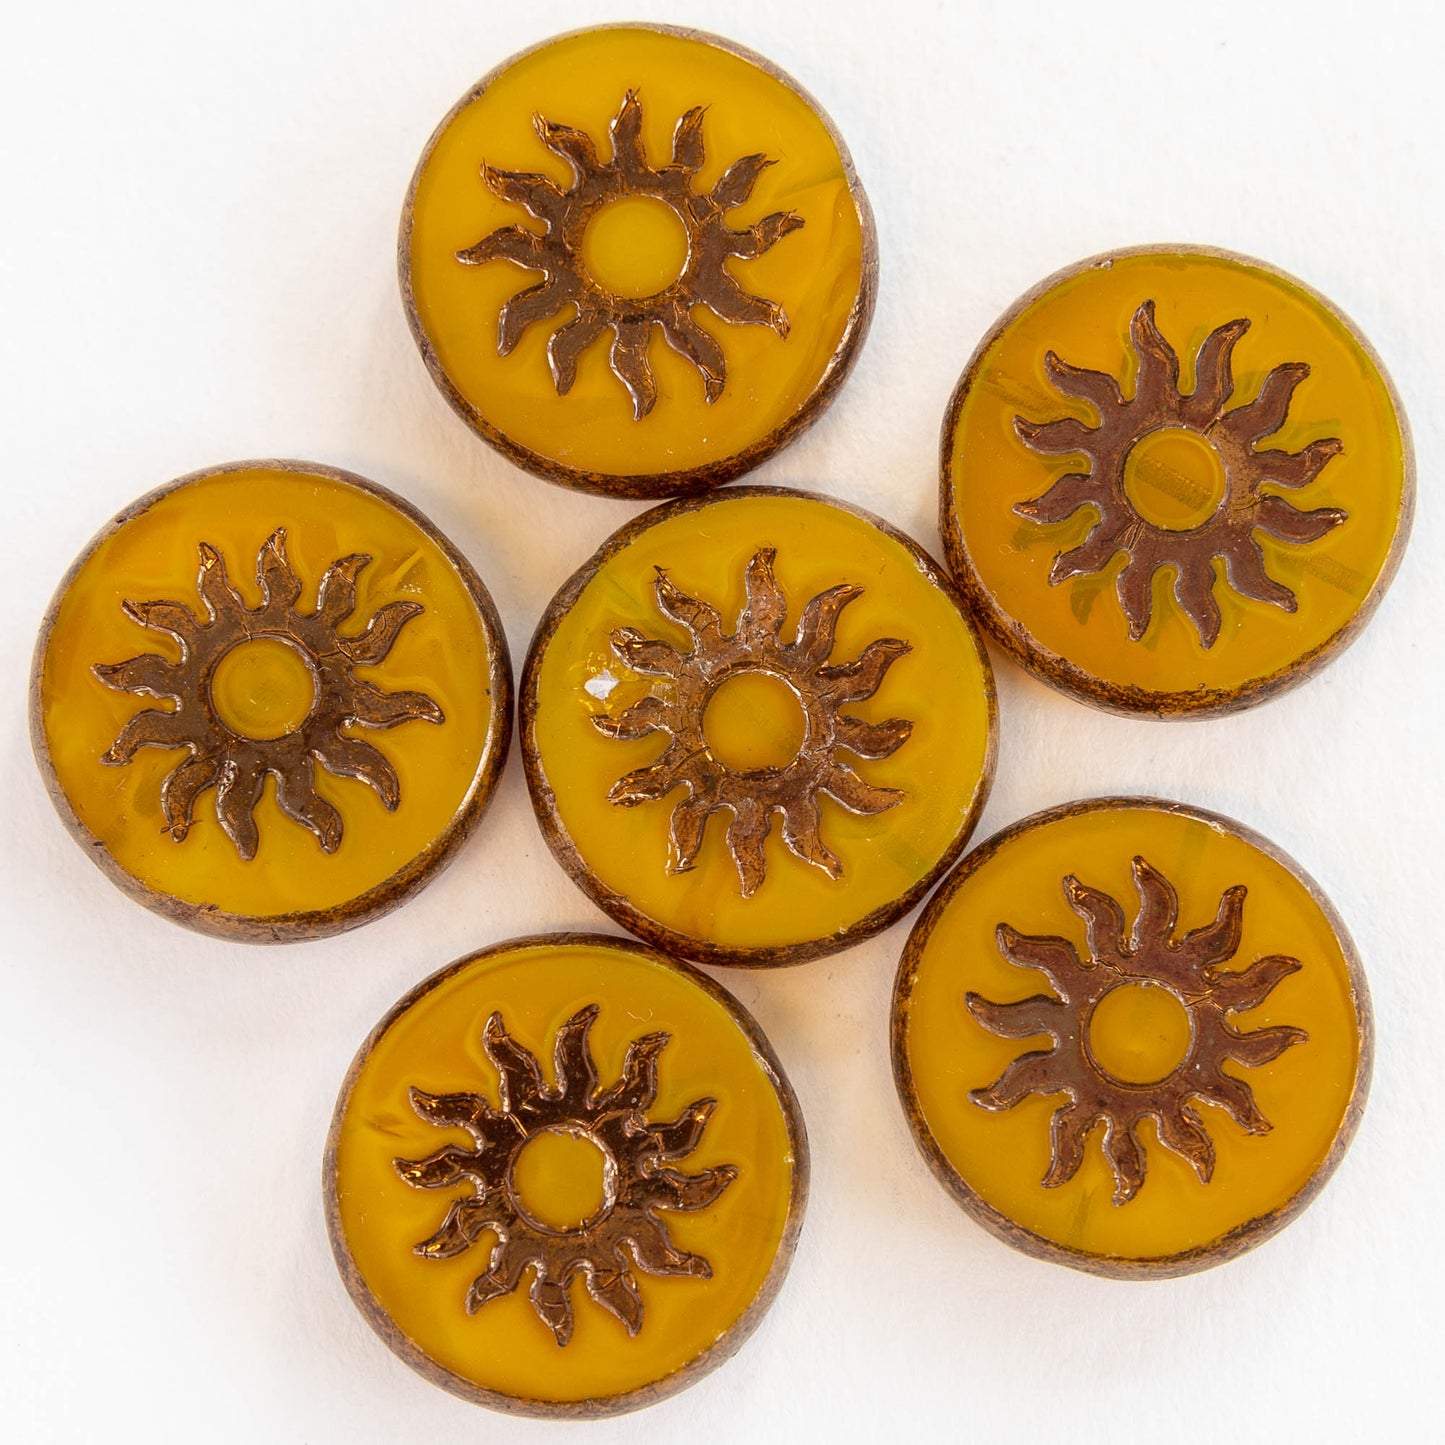 22mm Table Cut Sun Beads - Yellow with Bronze Finish - 1 Bead